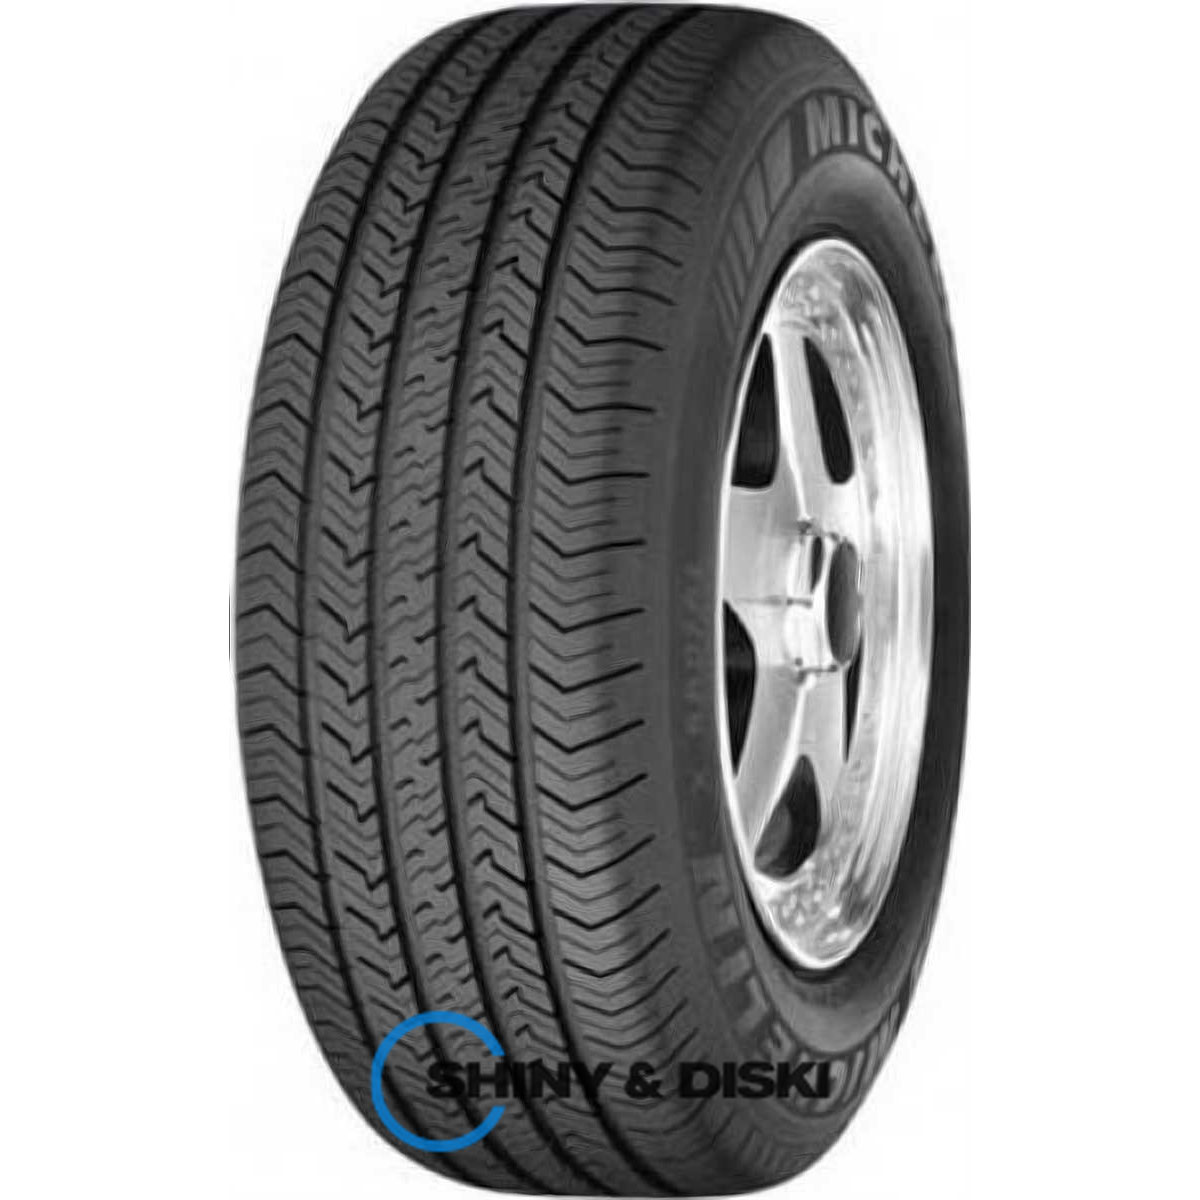 michelin x-radial dt 185/65 r15 86t